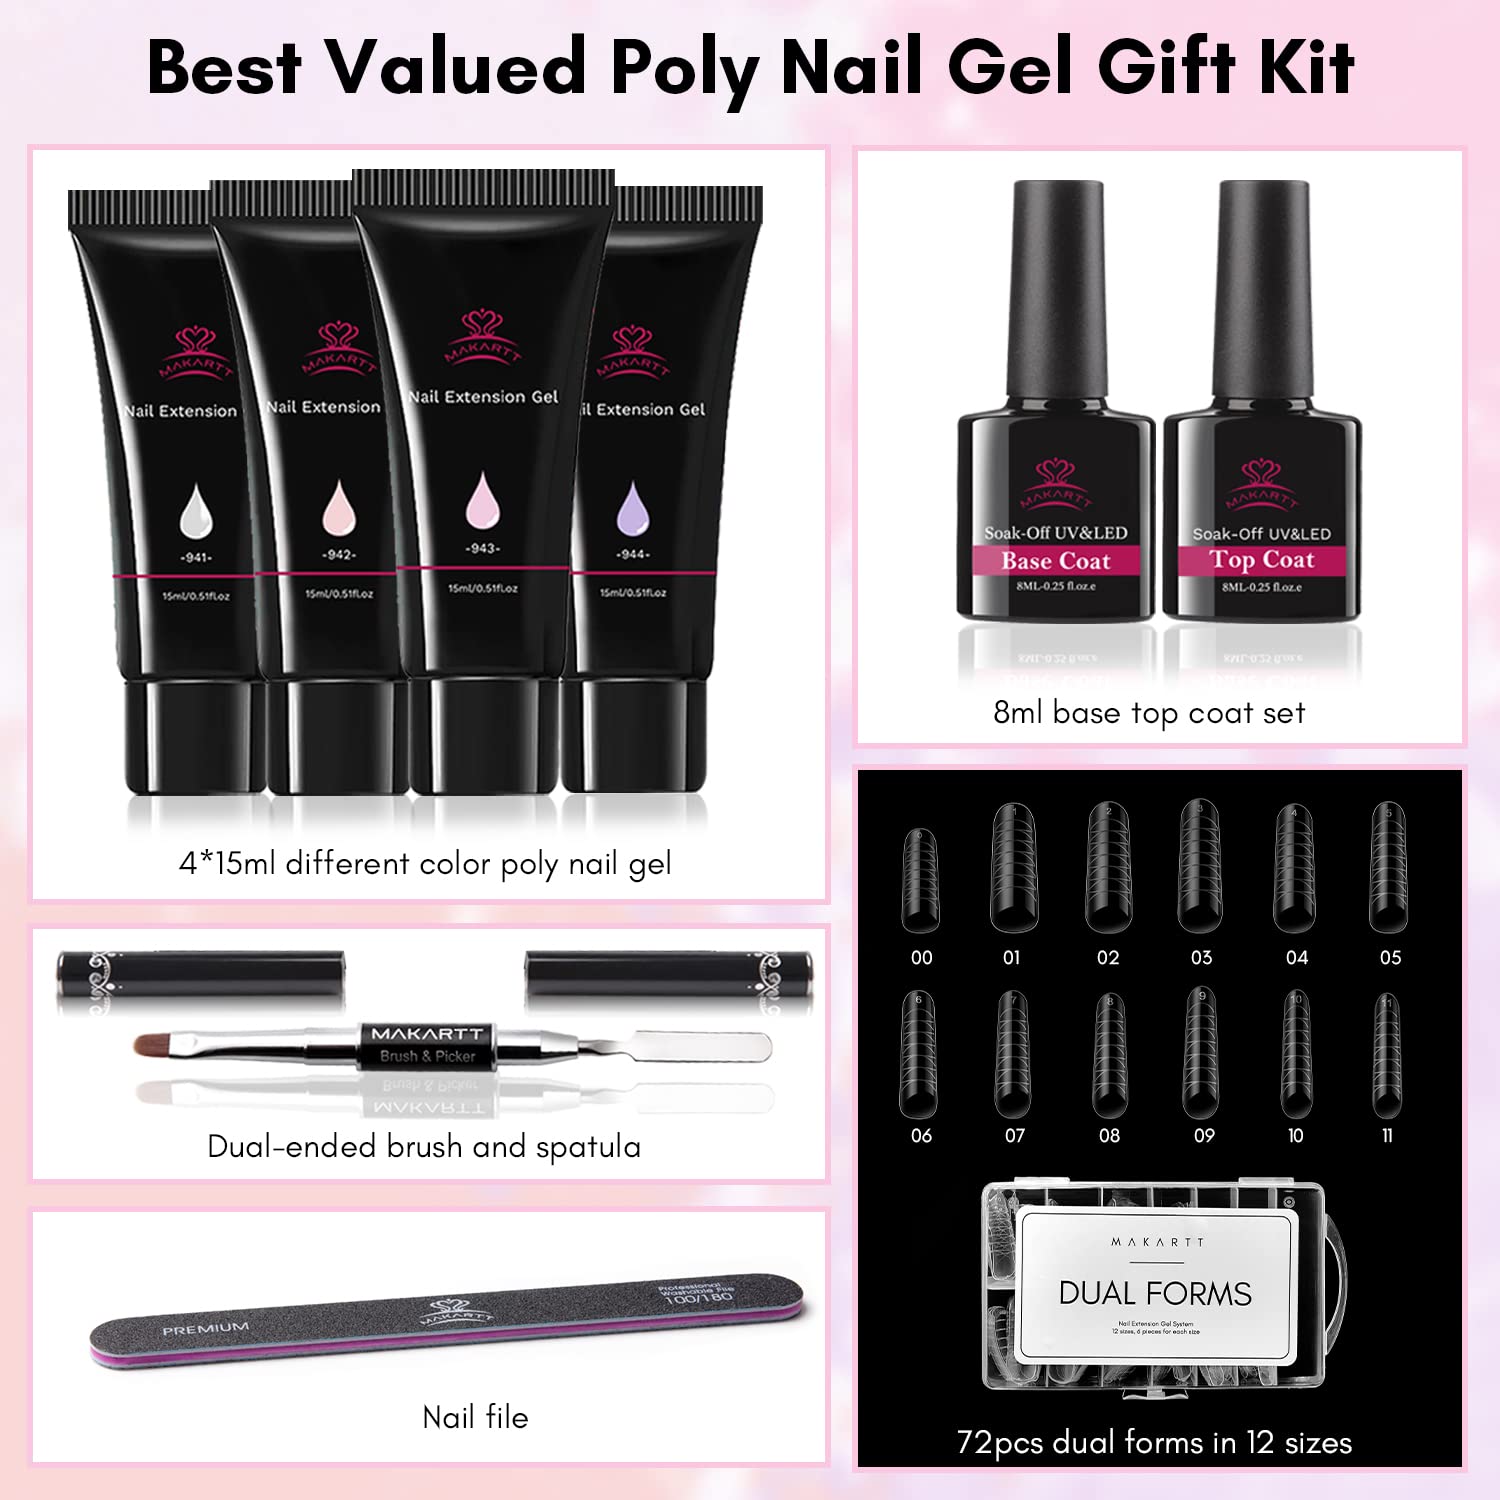 Nude Pink Collection Poly Gel Nail Extension Kit